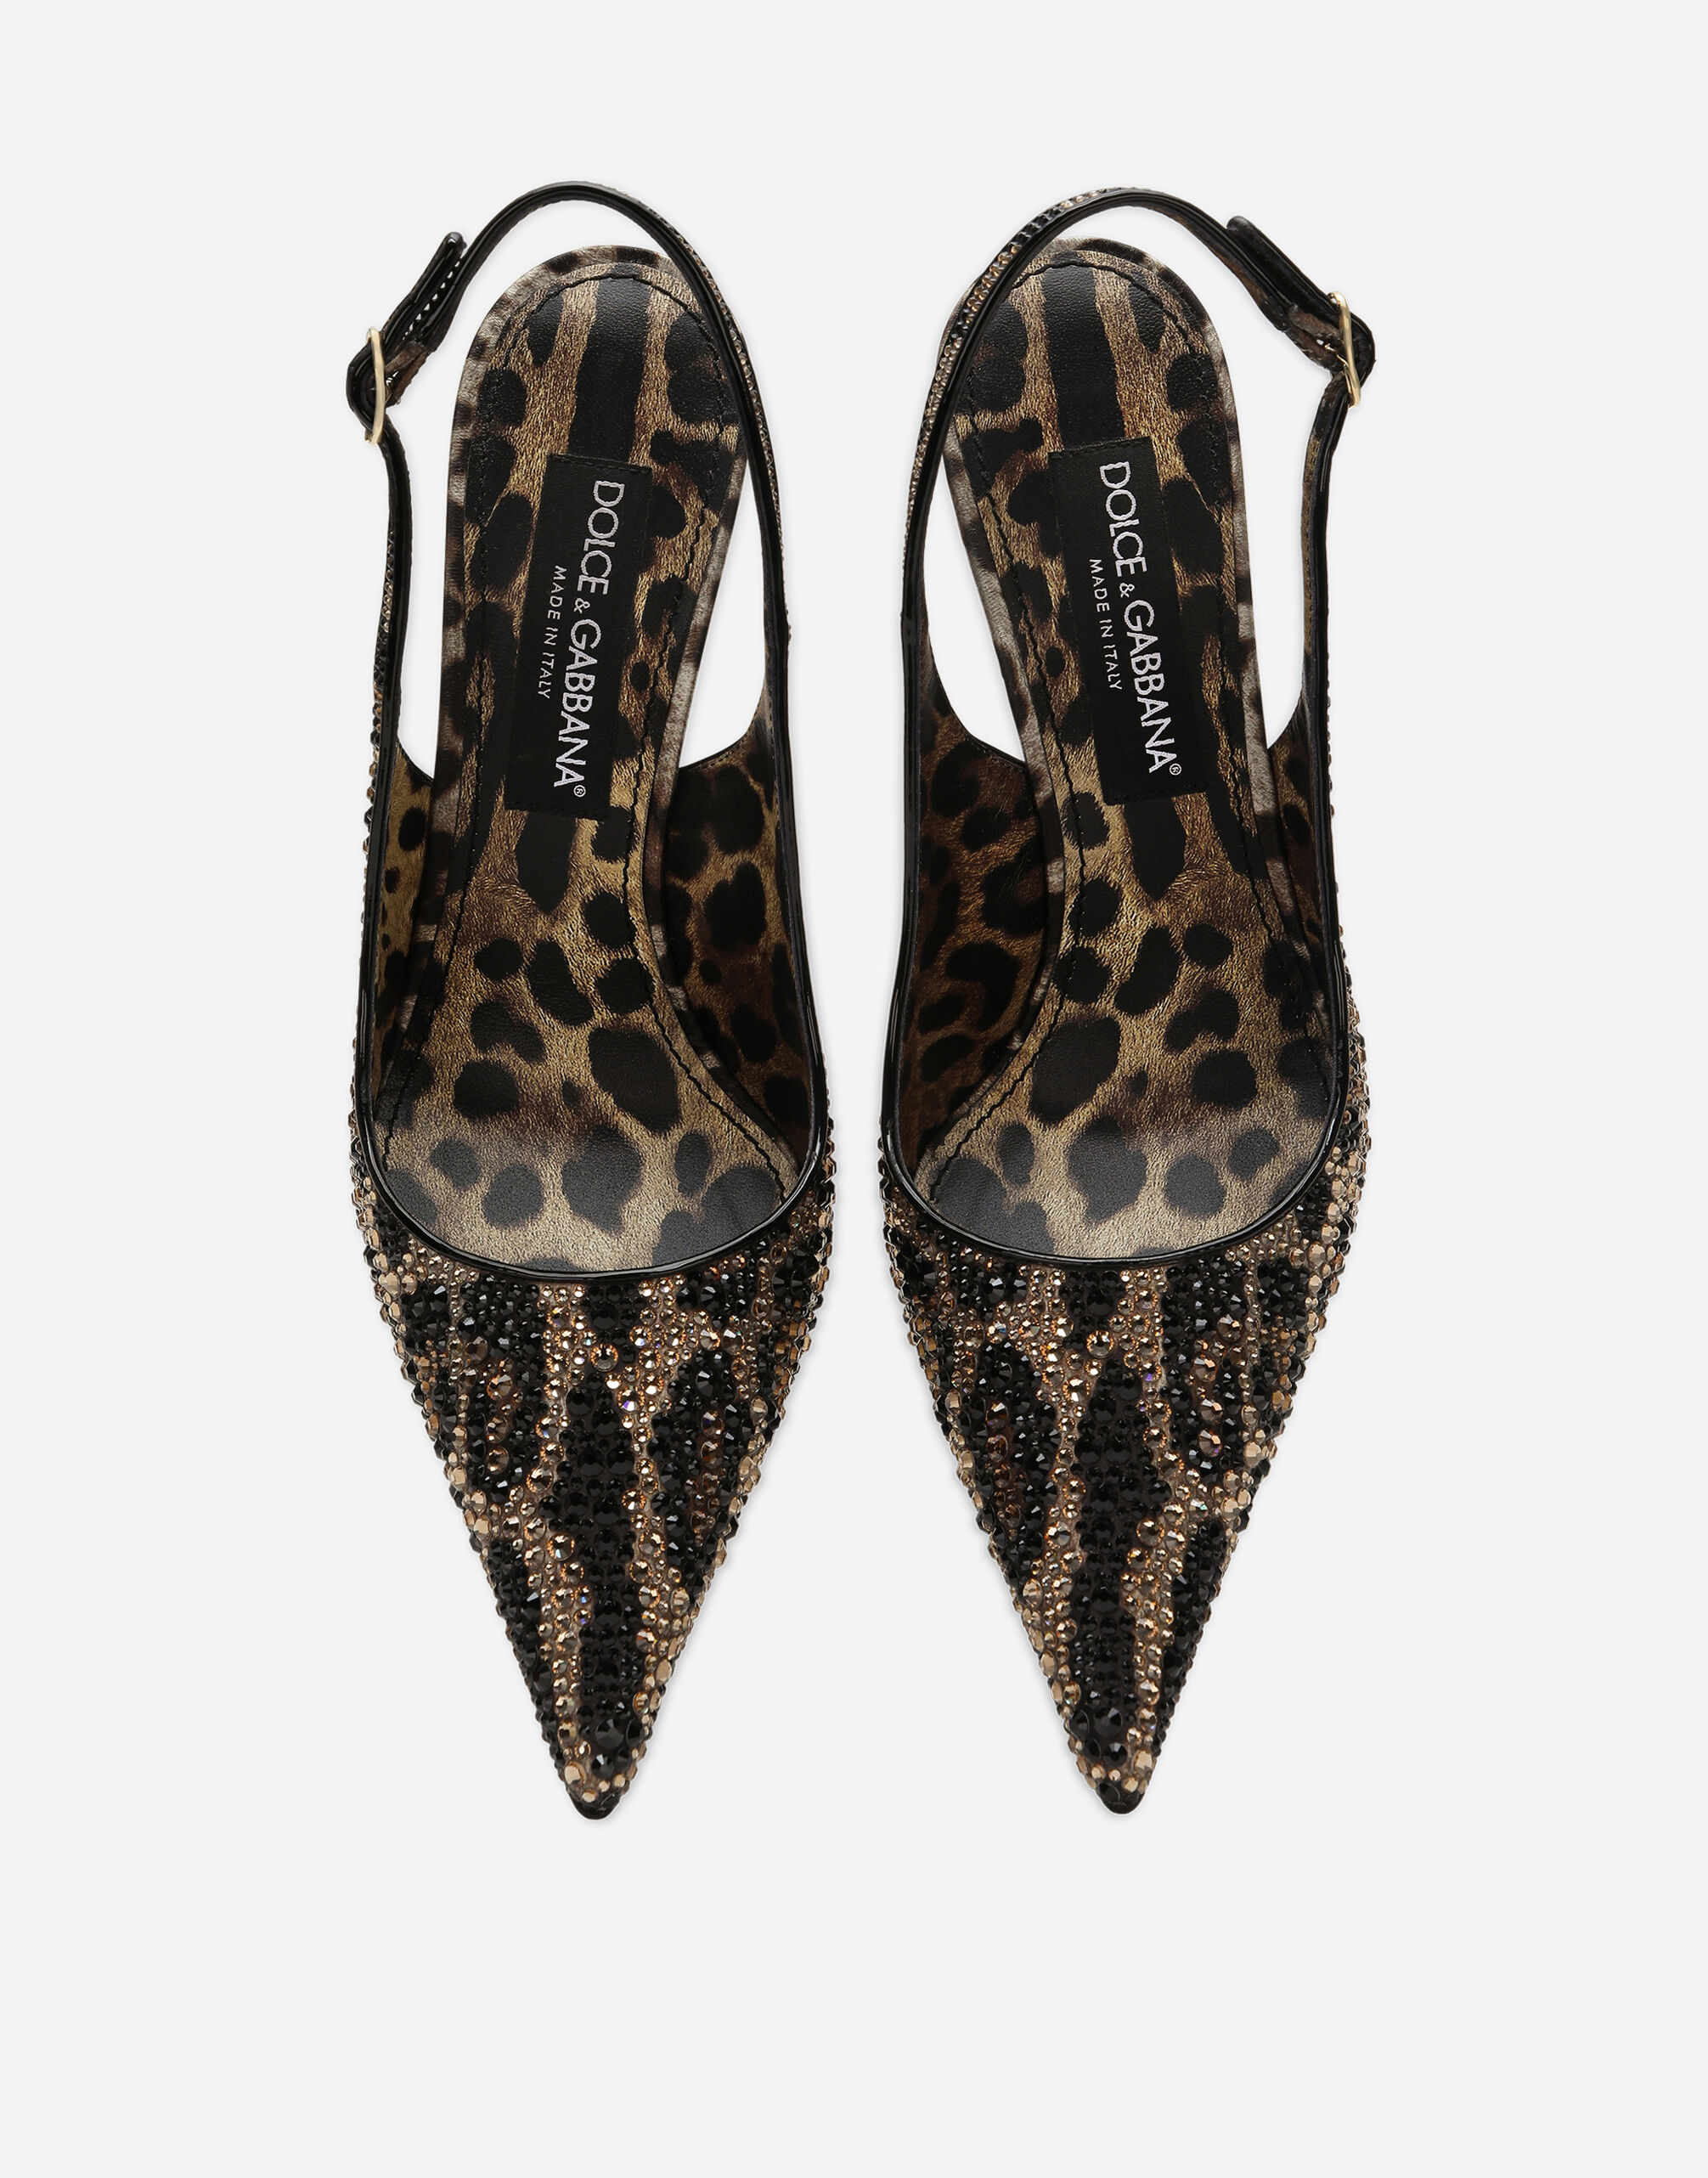 Satin slingbacks with fusible rhinestones in Animal Print for 